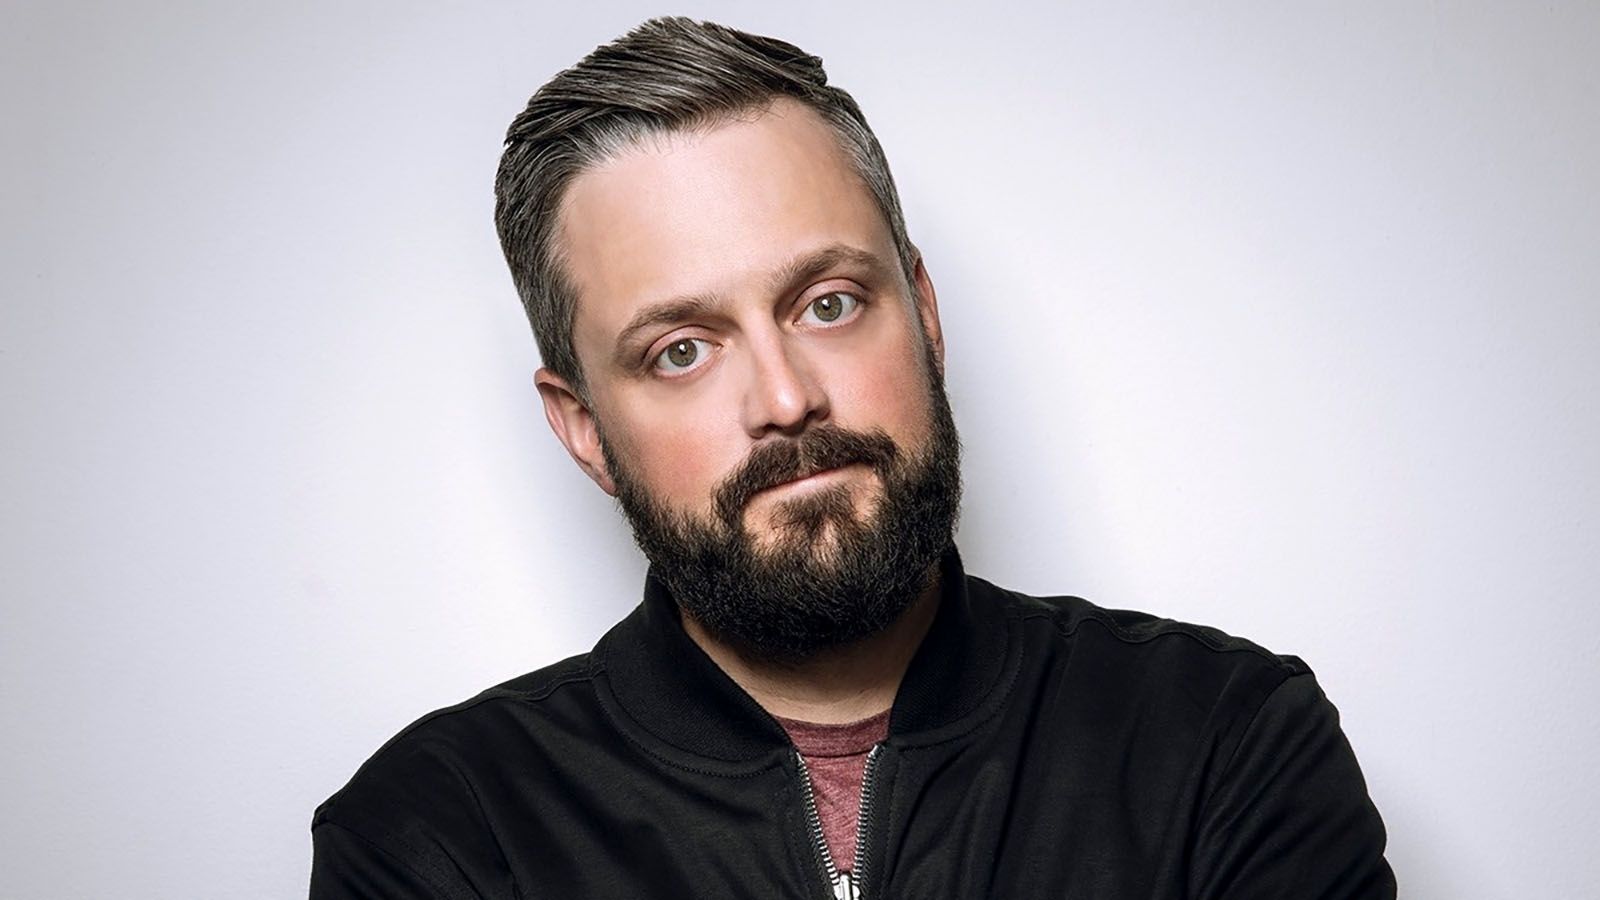 Nate Bargatze will be among the comedians at the inaugural 312 Comedy Festival.